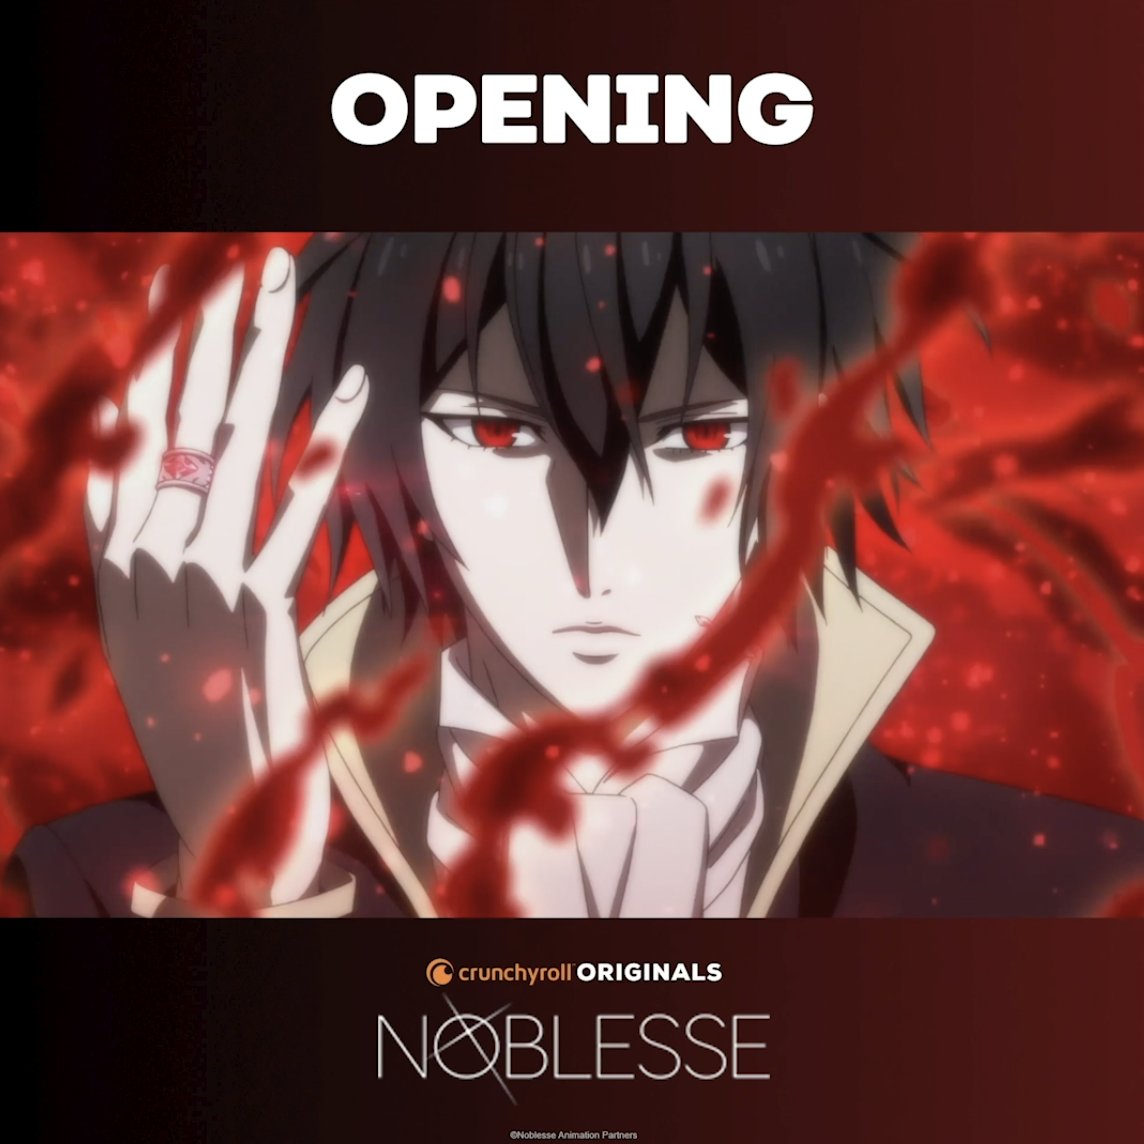 Noblesse - Opening Video  BREAKING DAWN (Japanese Ver.) Produced by HYDE 